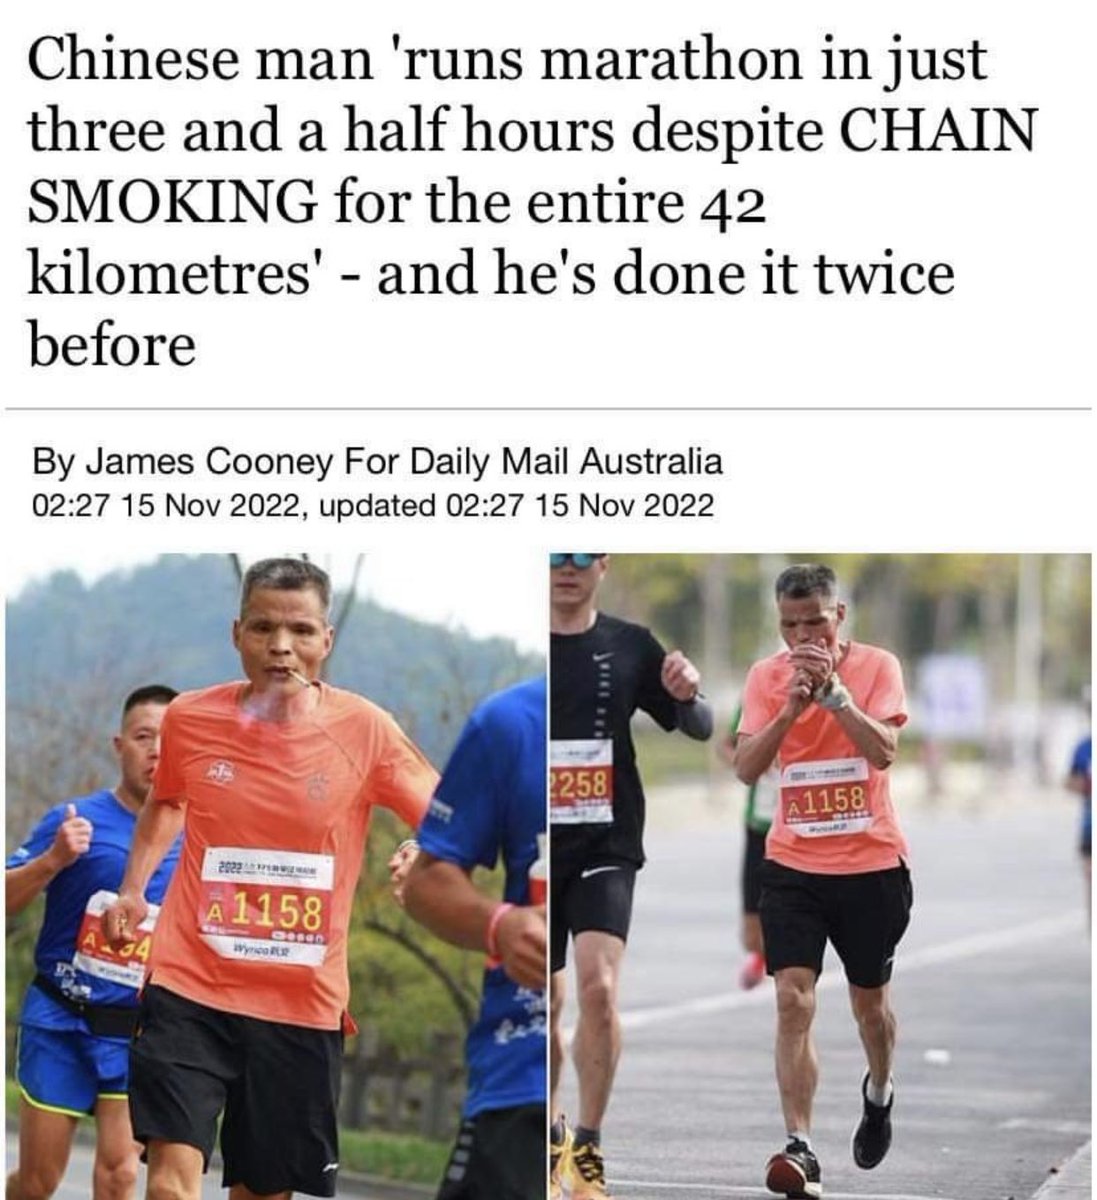 dudes posting their w's - chinese man runs marathon chain smoking - Chinese man 'runs marathon in just three and a half hours despite Chain Smoking for the entire 42 kilometres' and he's done it twice before By James Cooney For Daily Mail Australia , upda